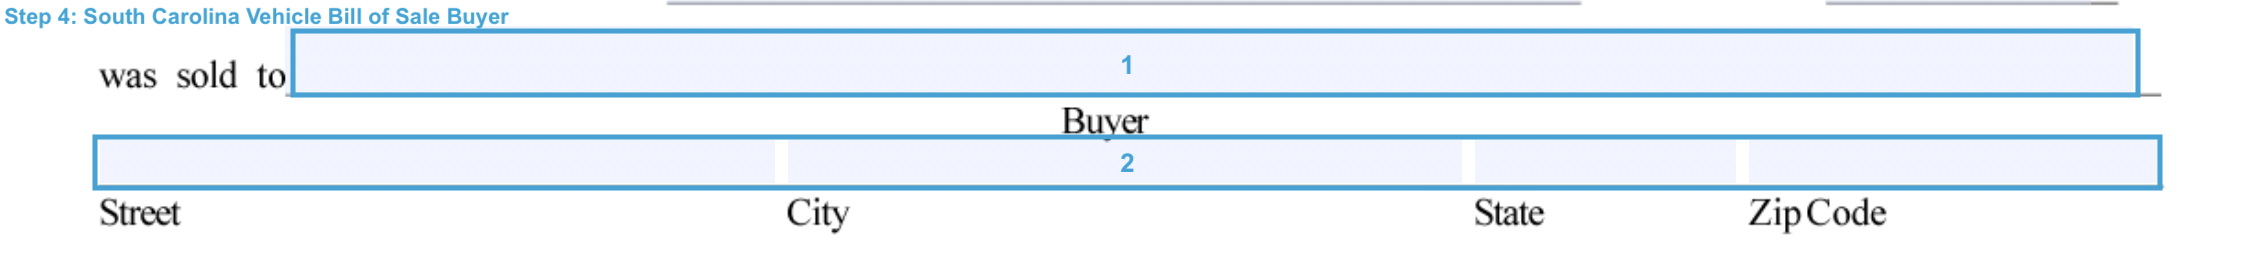 Section for filling out the buyer's particulars of a South Carolina bill of sale form for car